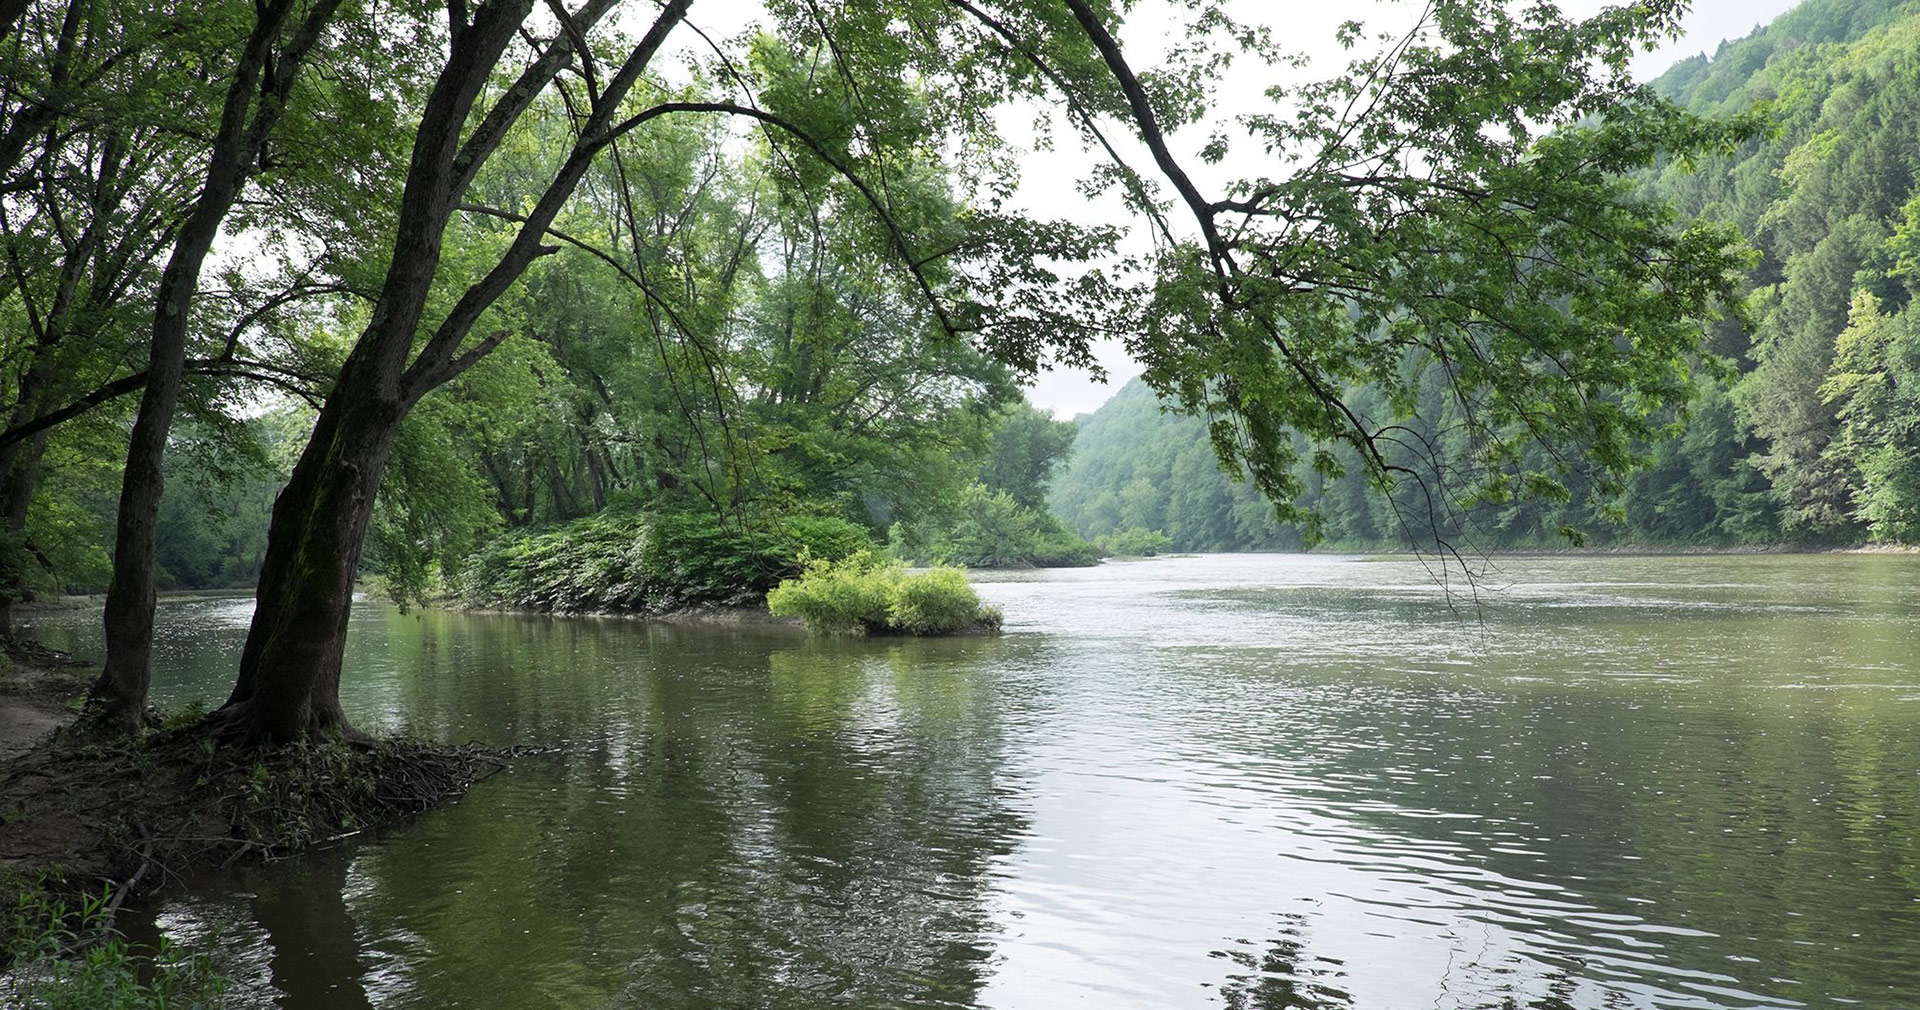 Site of the priesthood restoration at the Susquehanna River. Image via Church of Jesus Christ.